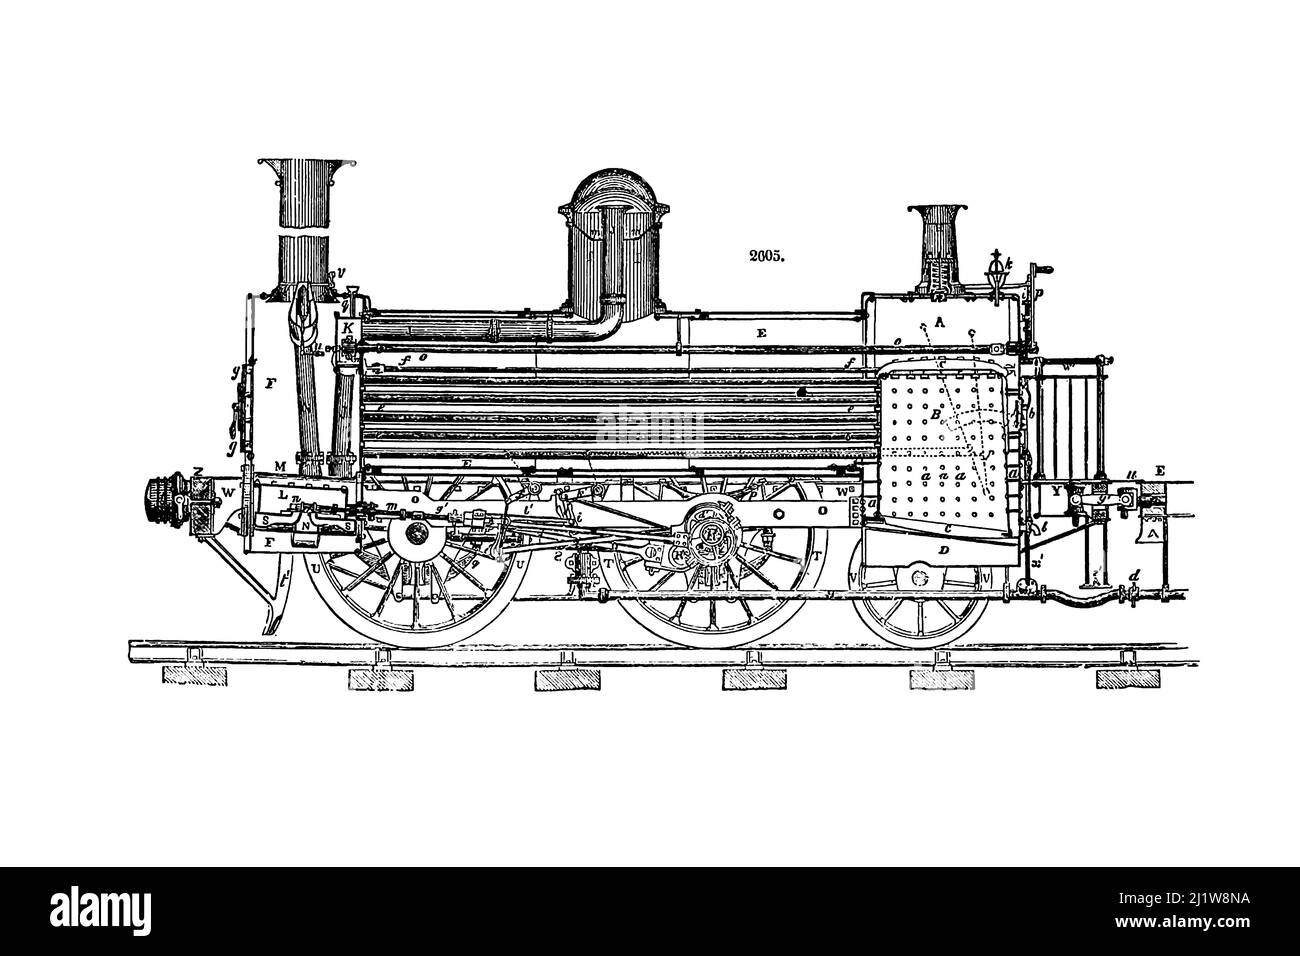 Locomotive Engine, Sketch from Appleton's dictionary of machines, mechanics, engine-work, and engineering : illustrated with four thousand engravings on wood ; in two volumes by D. Appleton and Company Published New York : D. Appleton and Co 1873 Stock Photo